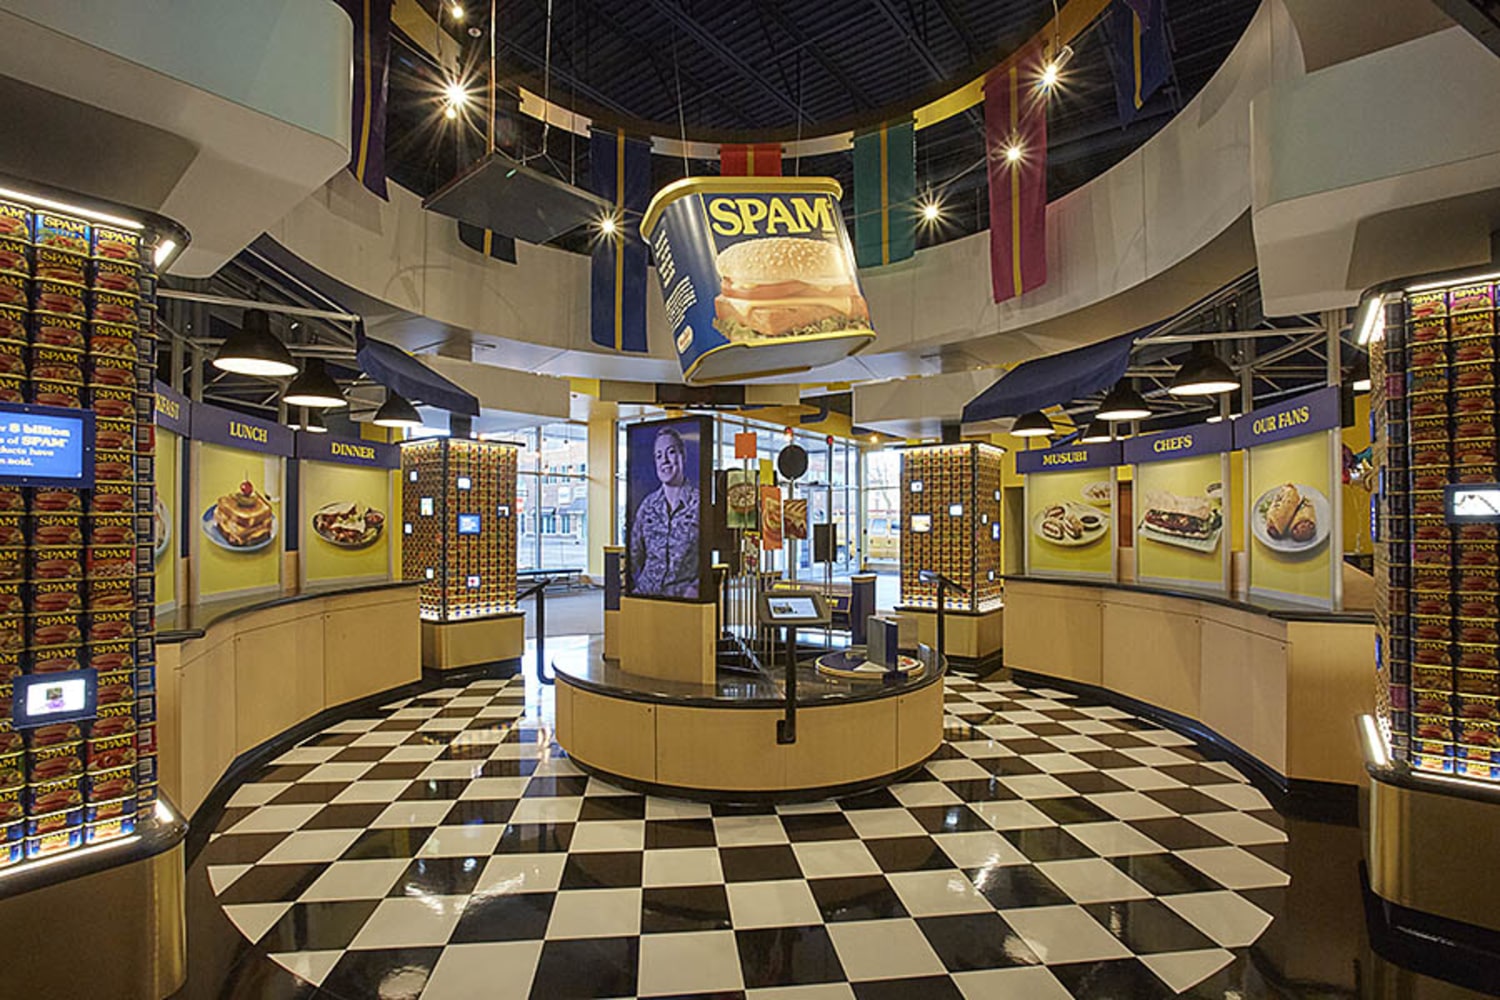 Image result for spam museum